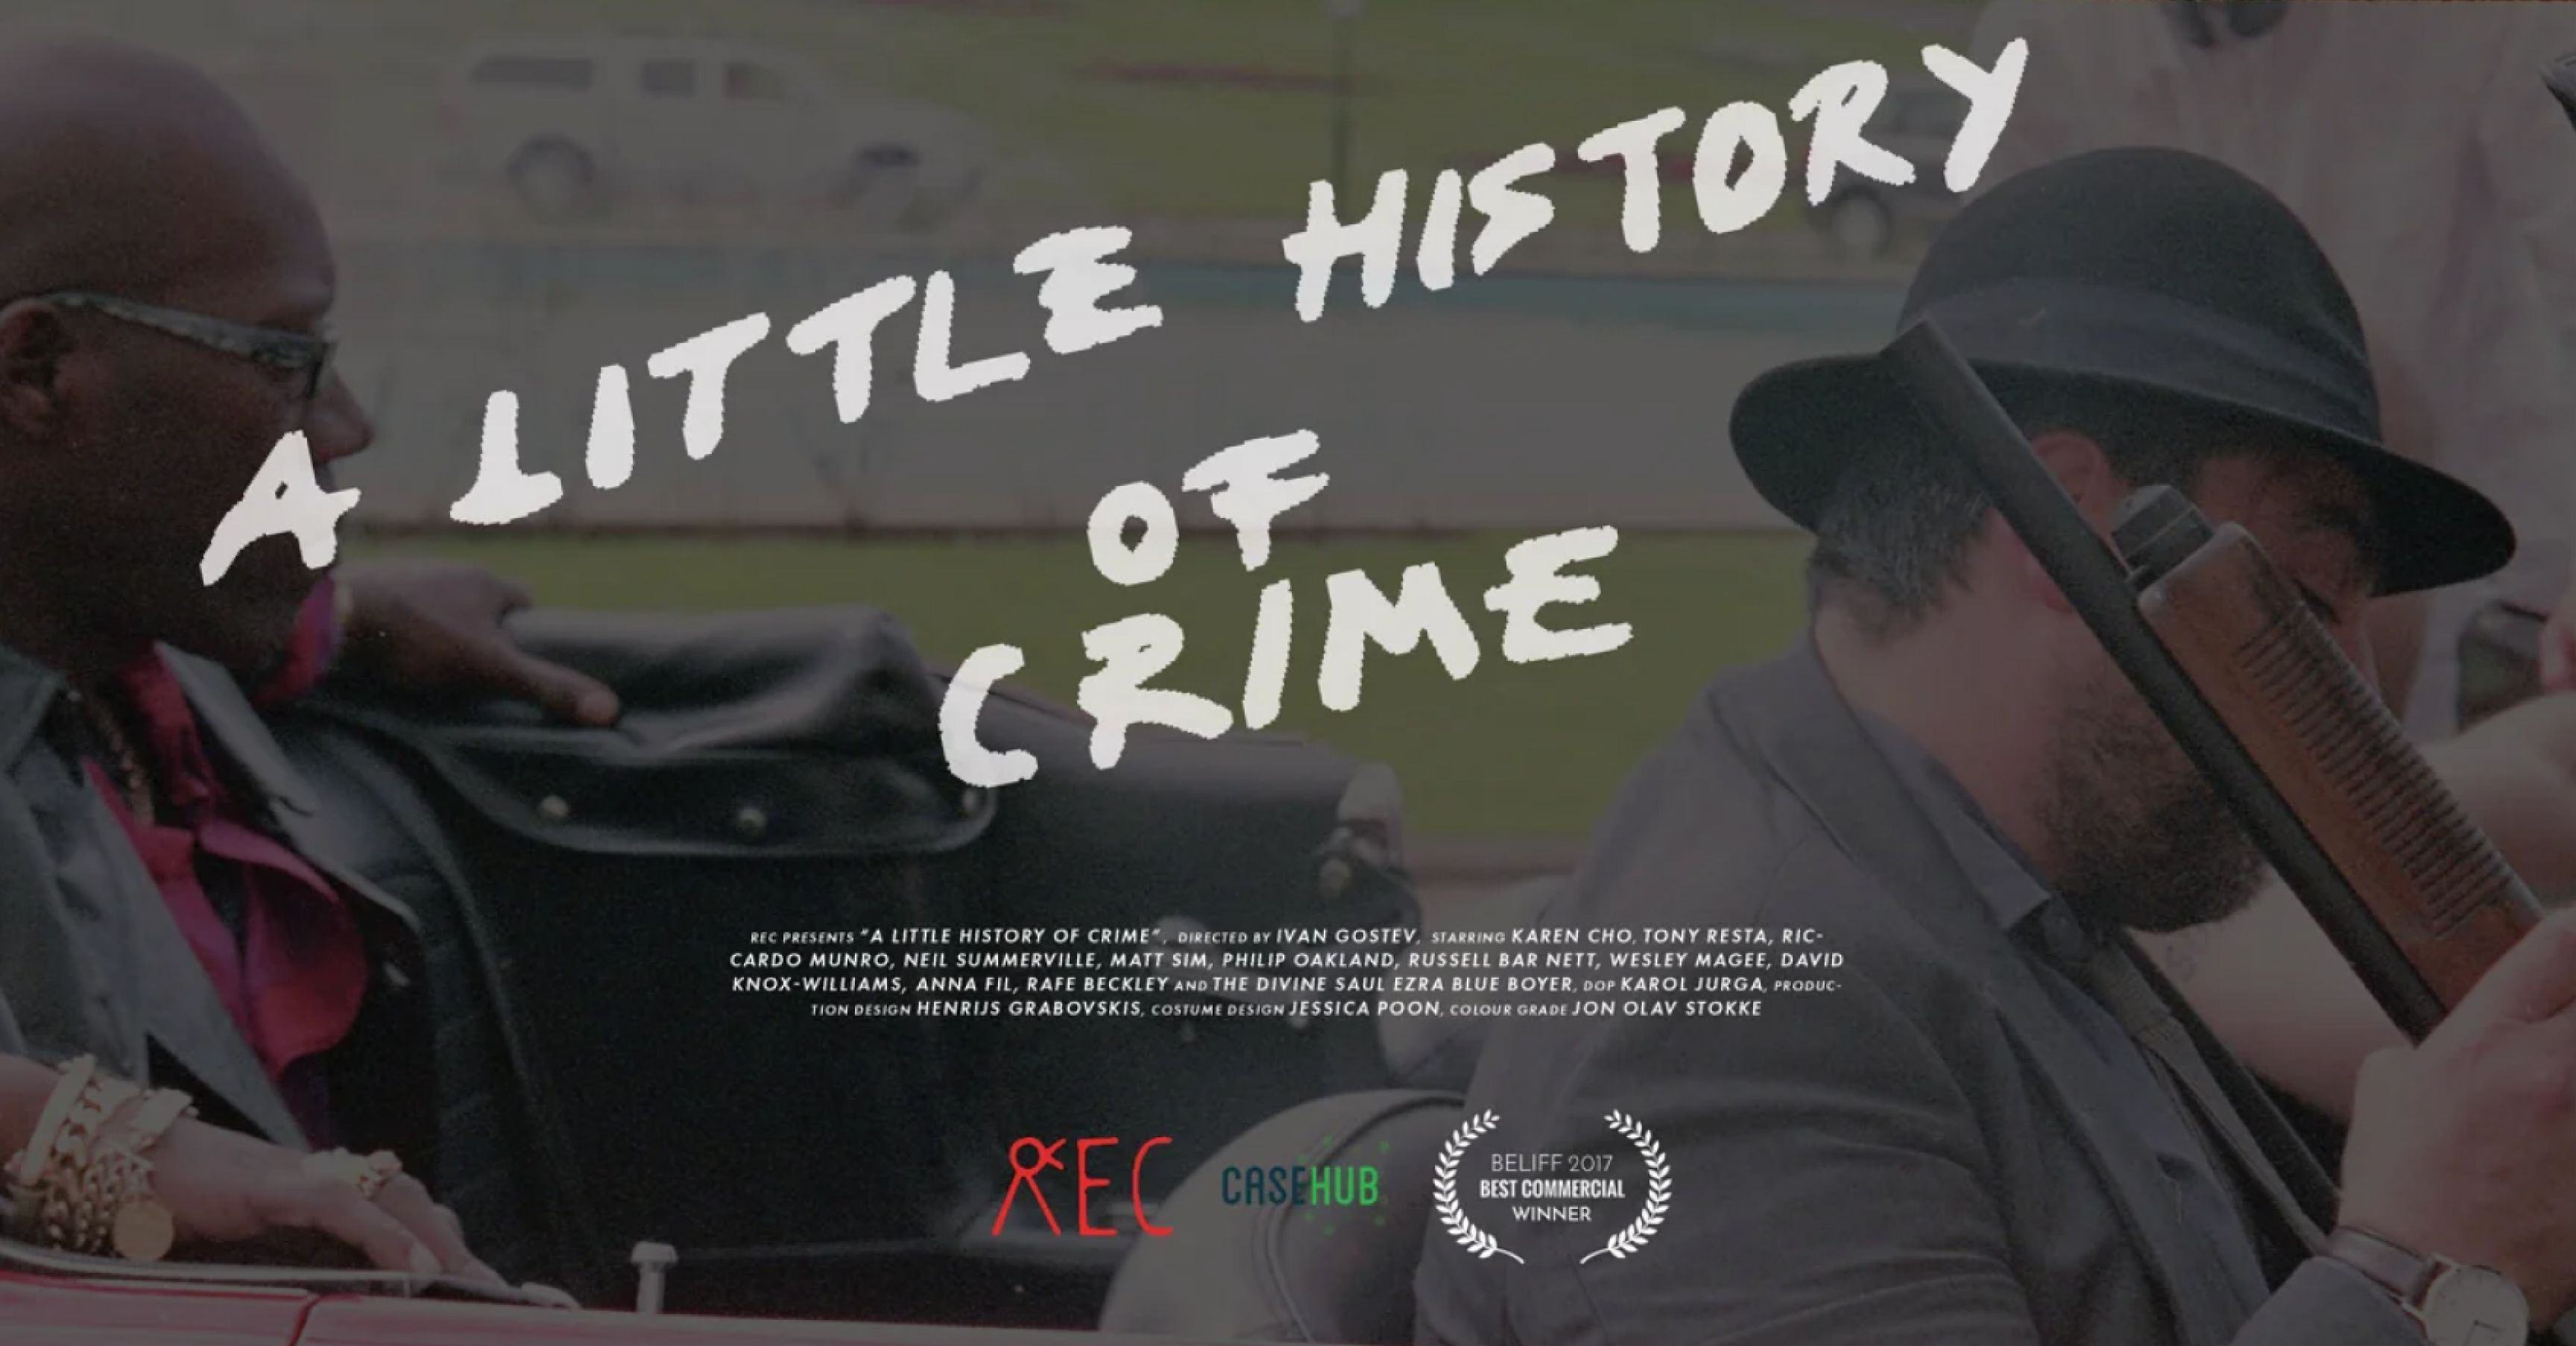 A Little History of Crime poster